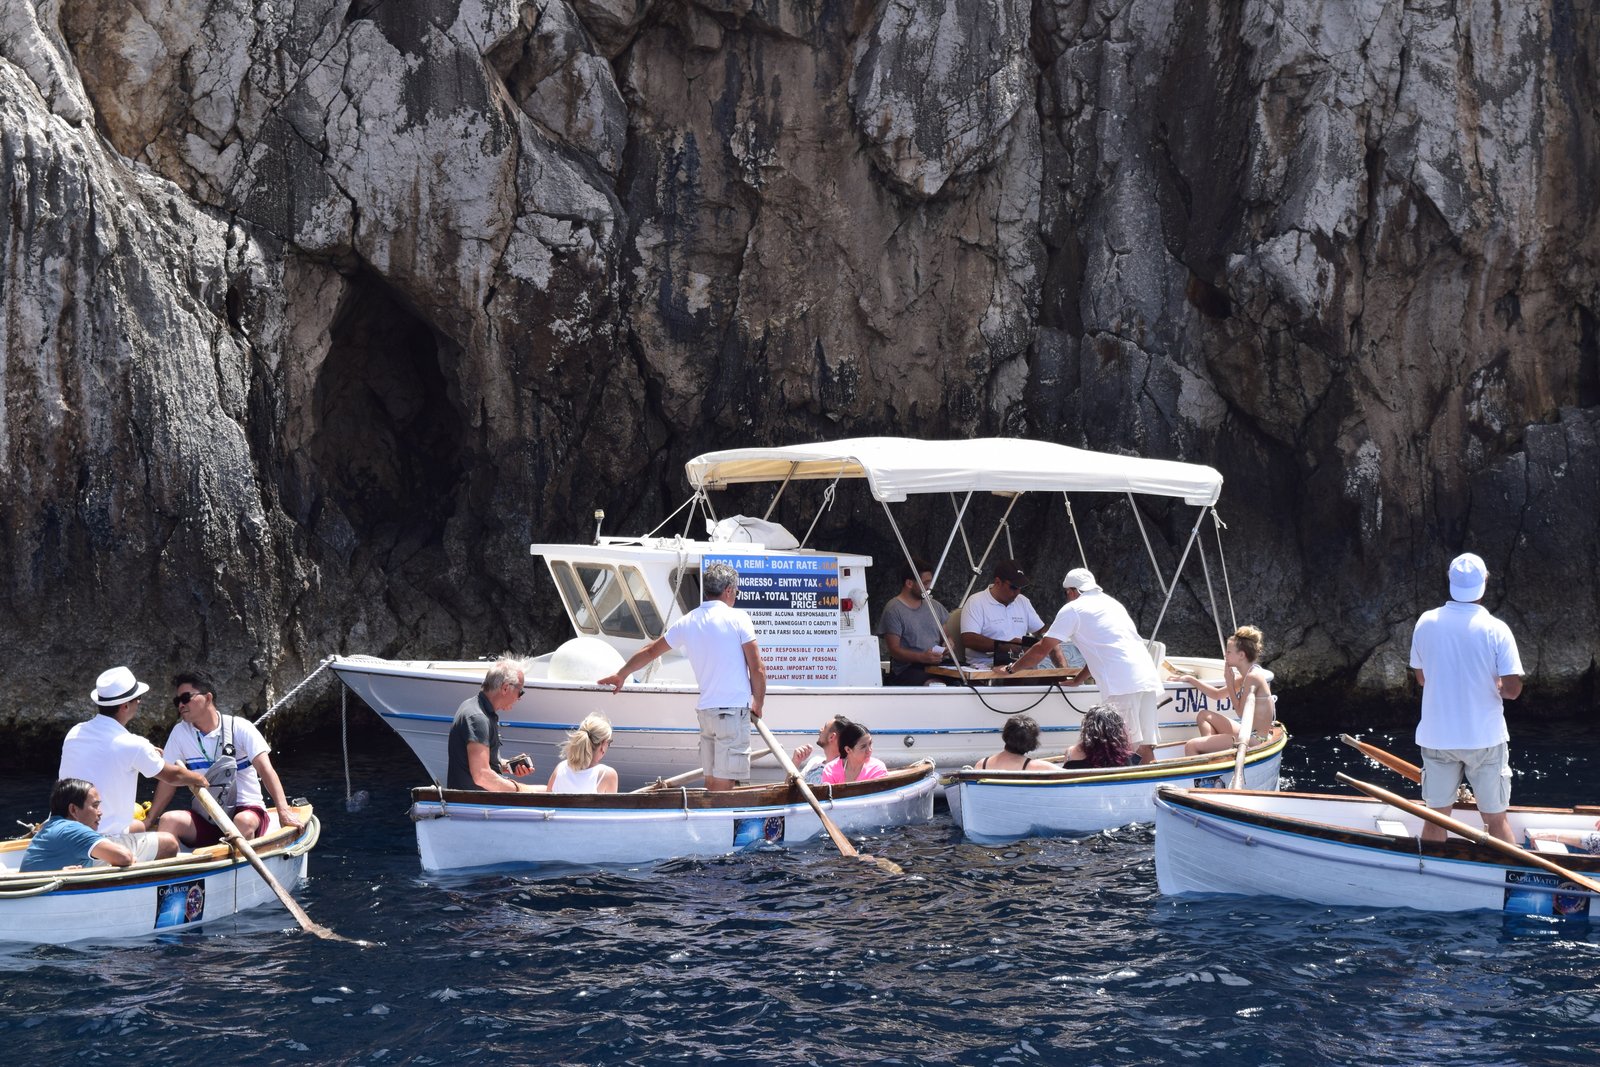 The Blue Grotto experience when on Capri in Italy, magical, beautiful, must do, ouritalianjourney.com, https://ouritalianjourney.com/experiencing-the-blue-grotto-is-it-worth-it